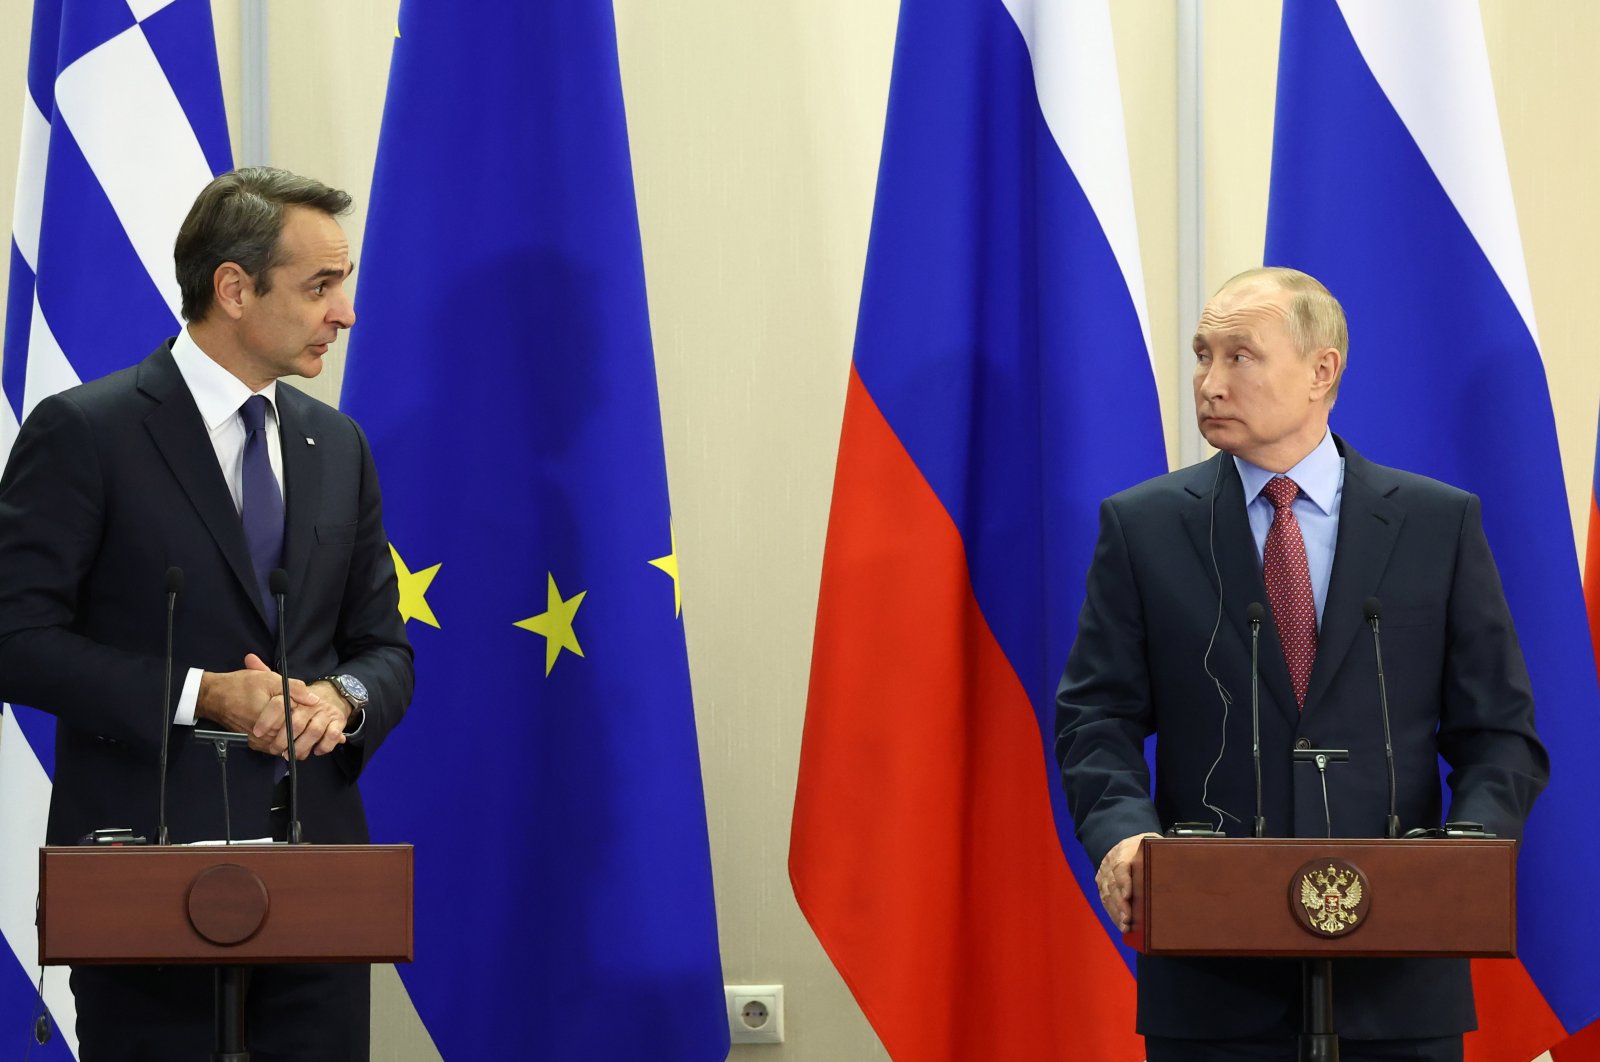 Russian President Vladimir Putin (R) and Greek Prime Minister Kyriakos Mitsotakis attend a joint news conference following their talks at the Bocharov Ruchei residence in Sochi, Russia, Dec. 8, 2021. ( Photo via EPA)